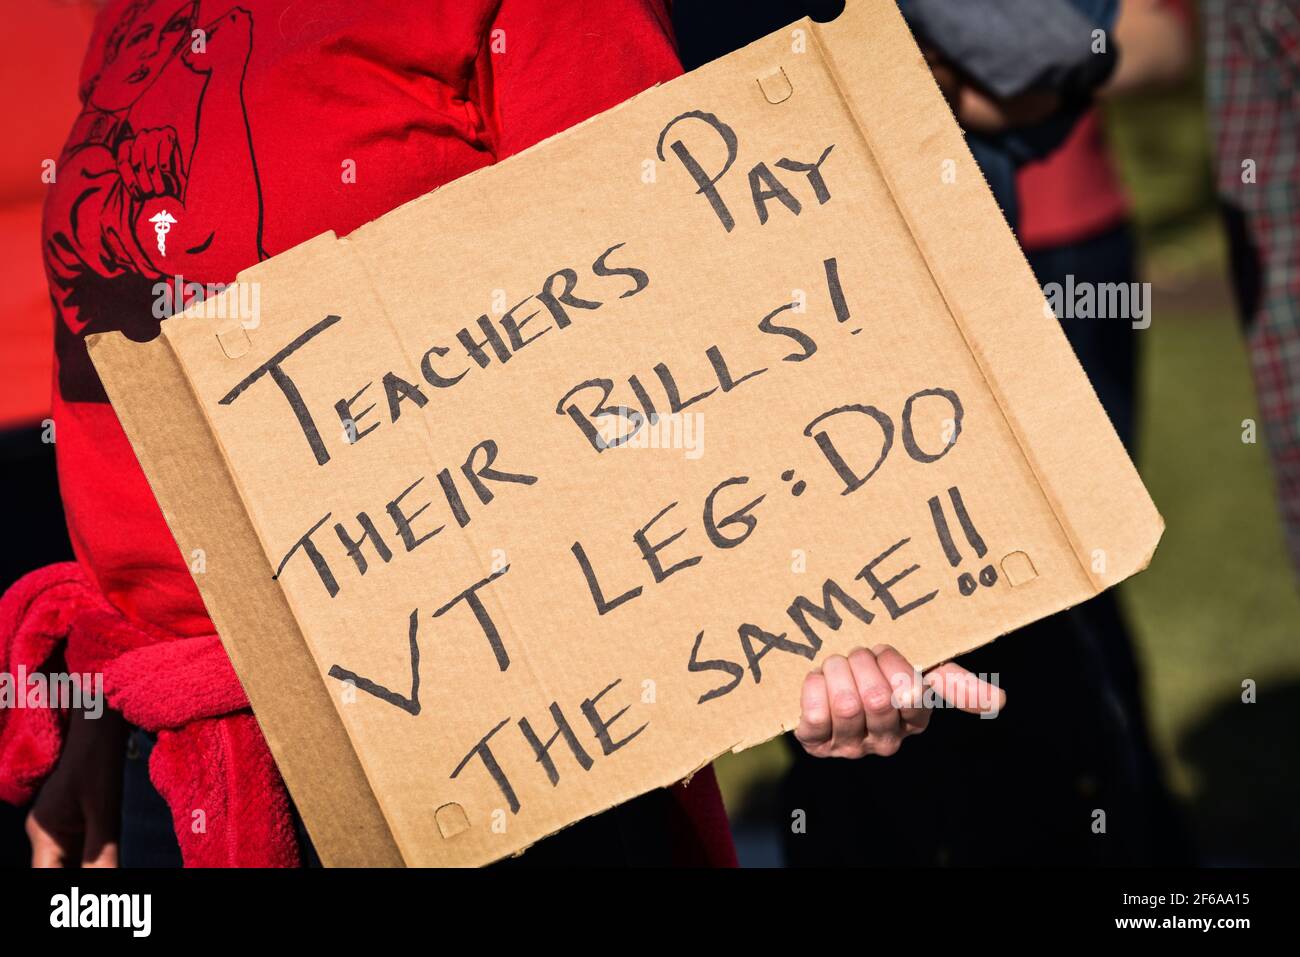 Demonstration by Vermont teachers to protest proposed changes in their publicly funded pension plans, Vermont State House, Montpelier, VT, USA. Stock Photo